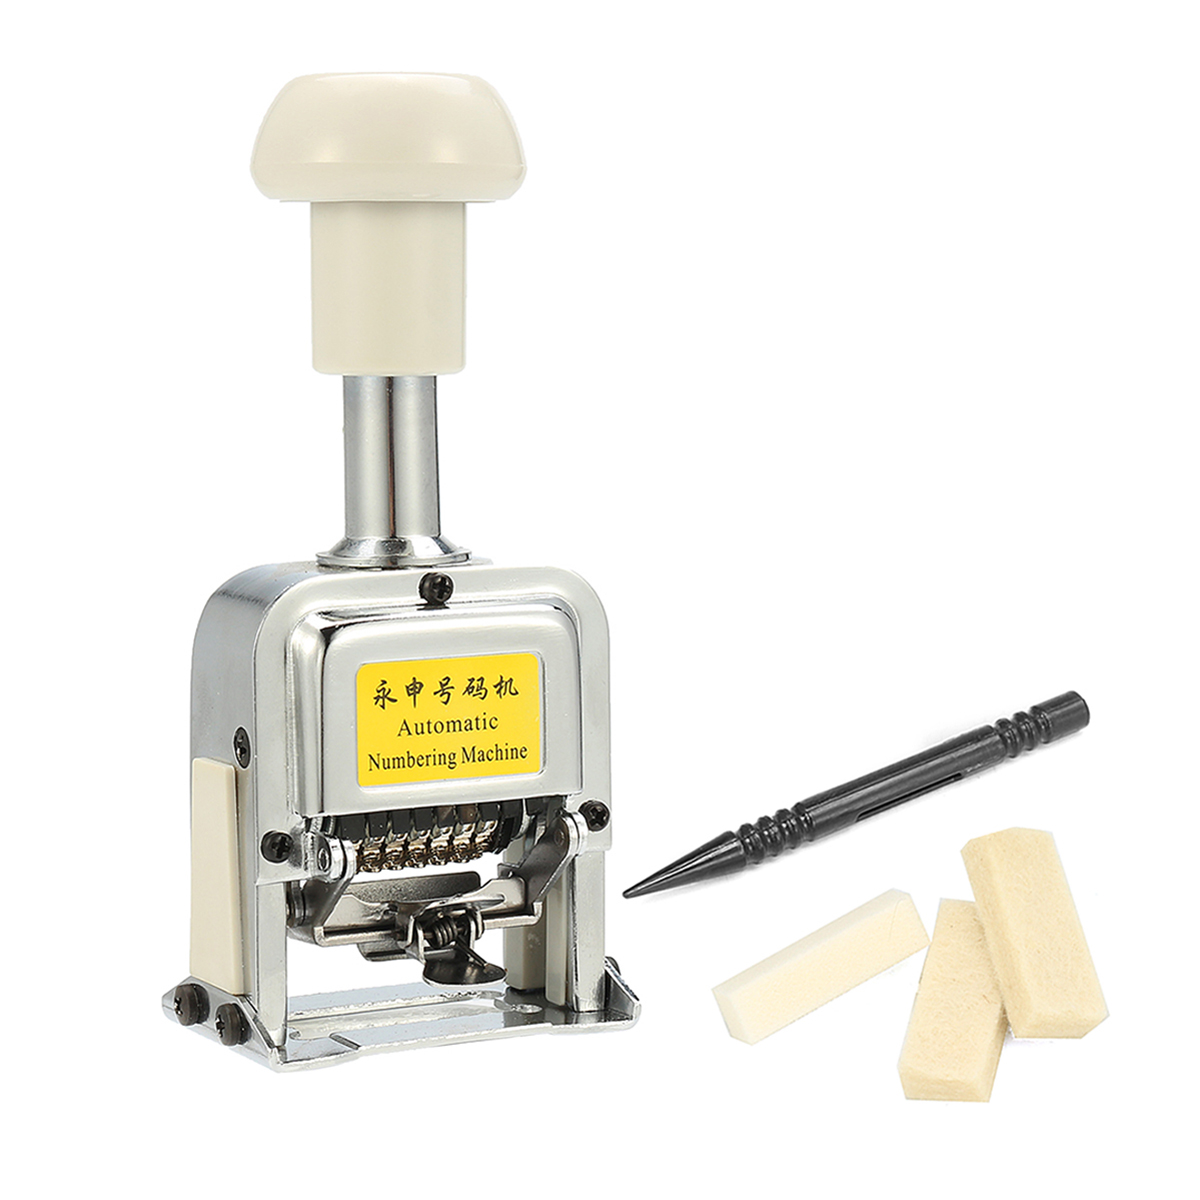 Self-Inking-7-Automatic-Numbering-Machine-Stick-Stamp-Numbering-Tools-Machine-1276846-9